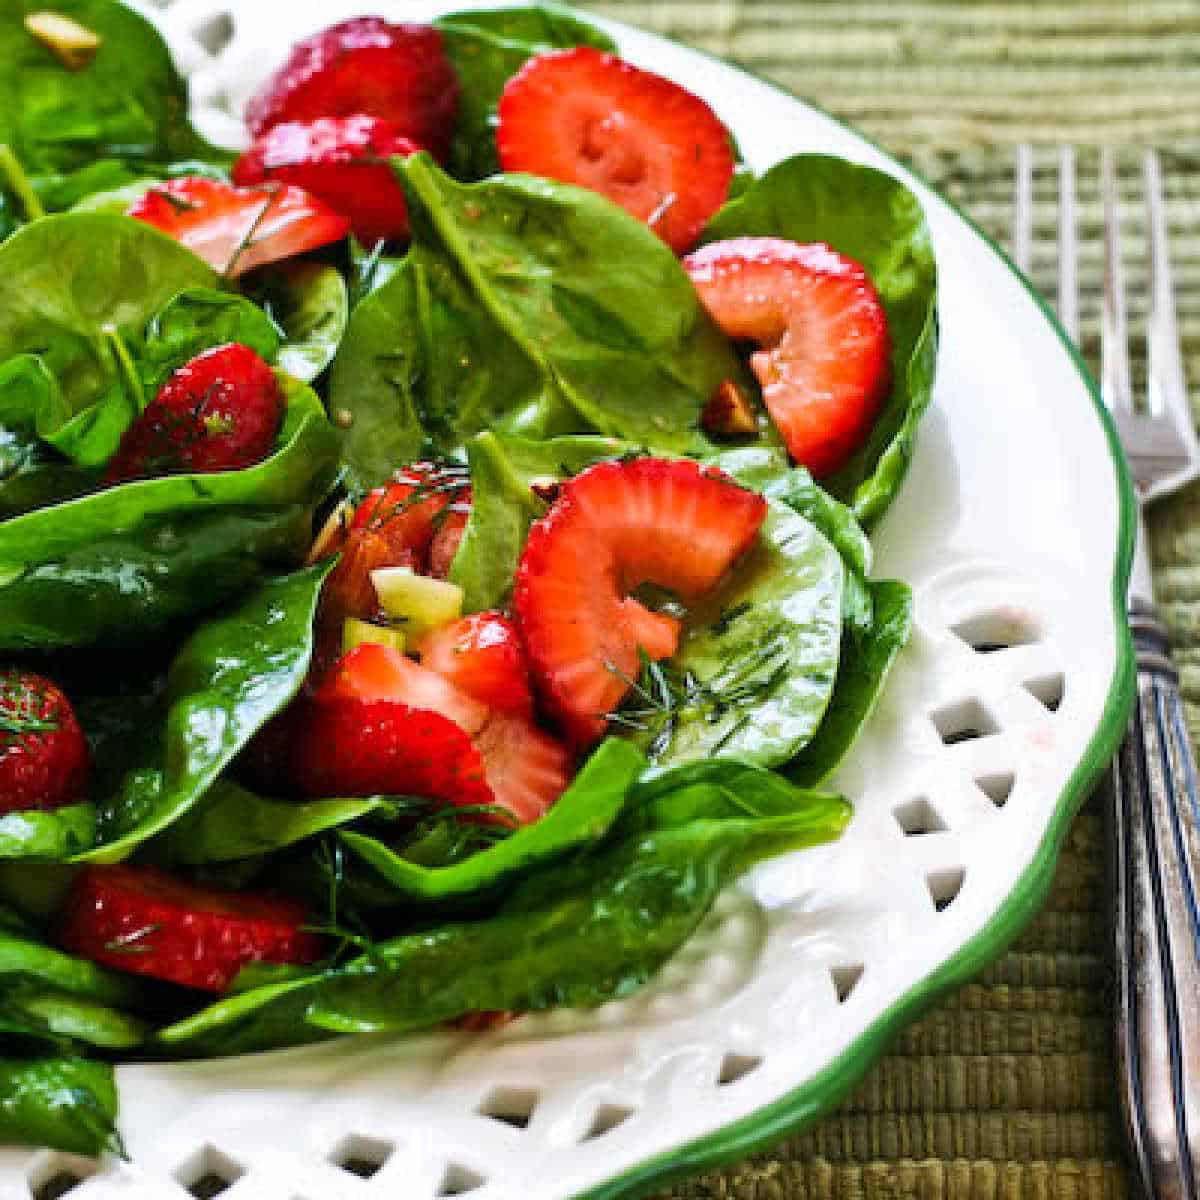 Strawberry Spinach Salad shown on serving plate